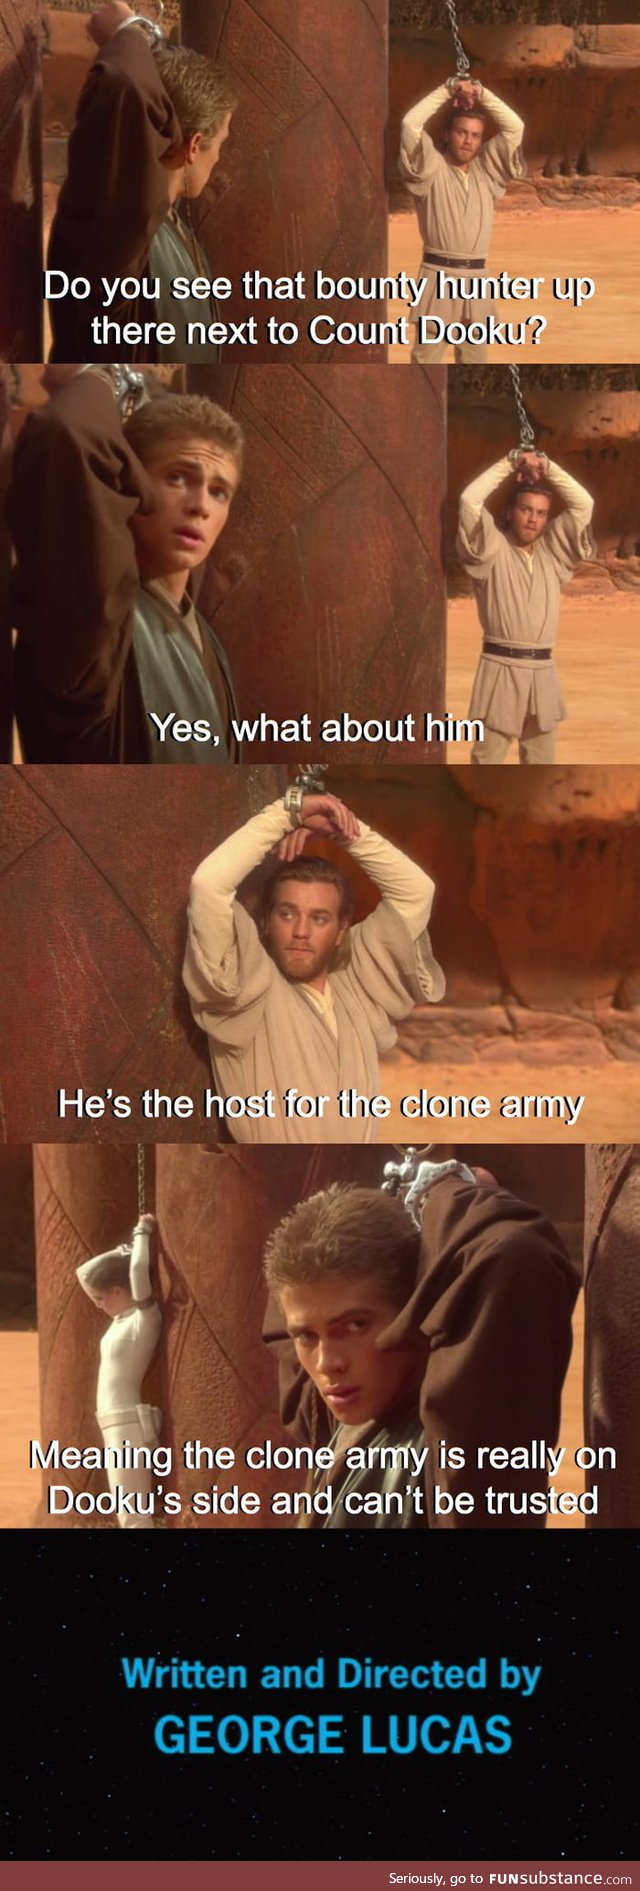 He can't post that! Shoot him or something!